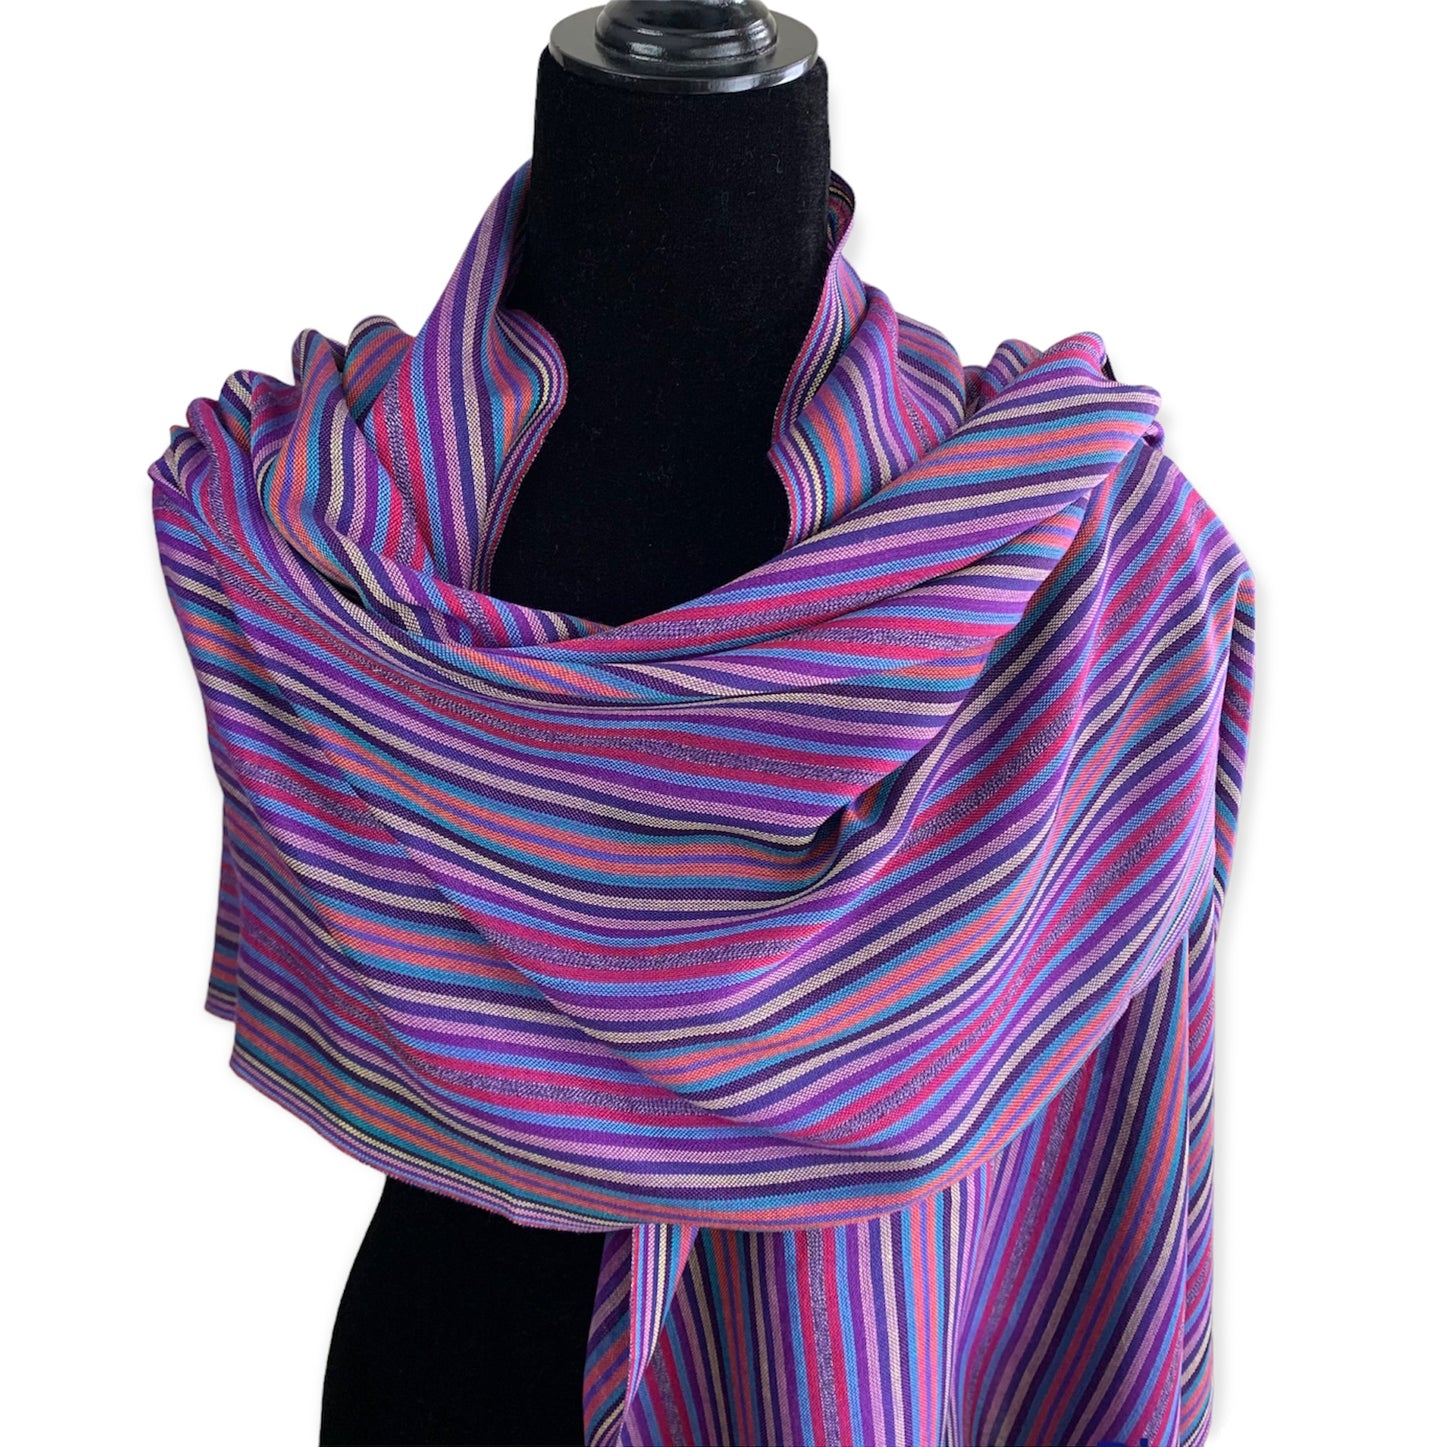 Thin Striped Handwoven Bamboo Viscose Scarf - Shades of Lavender